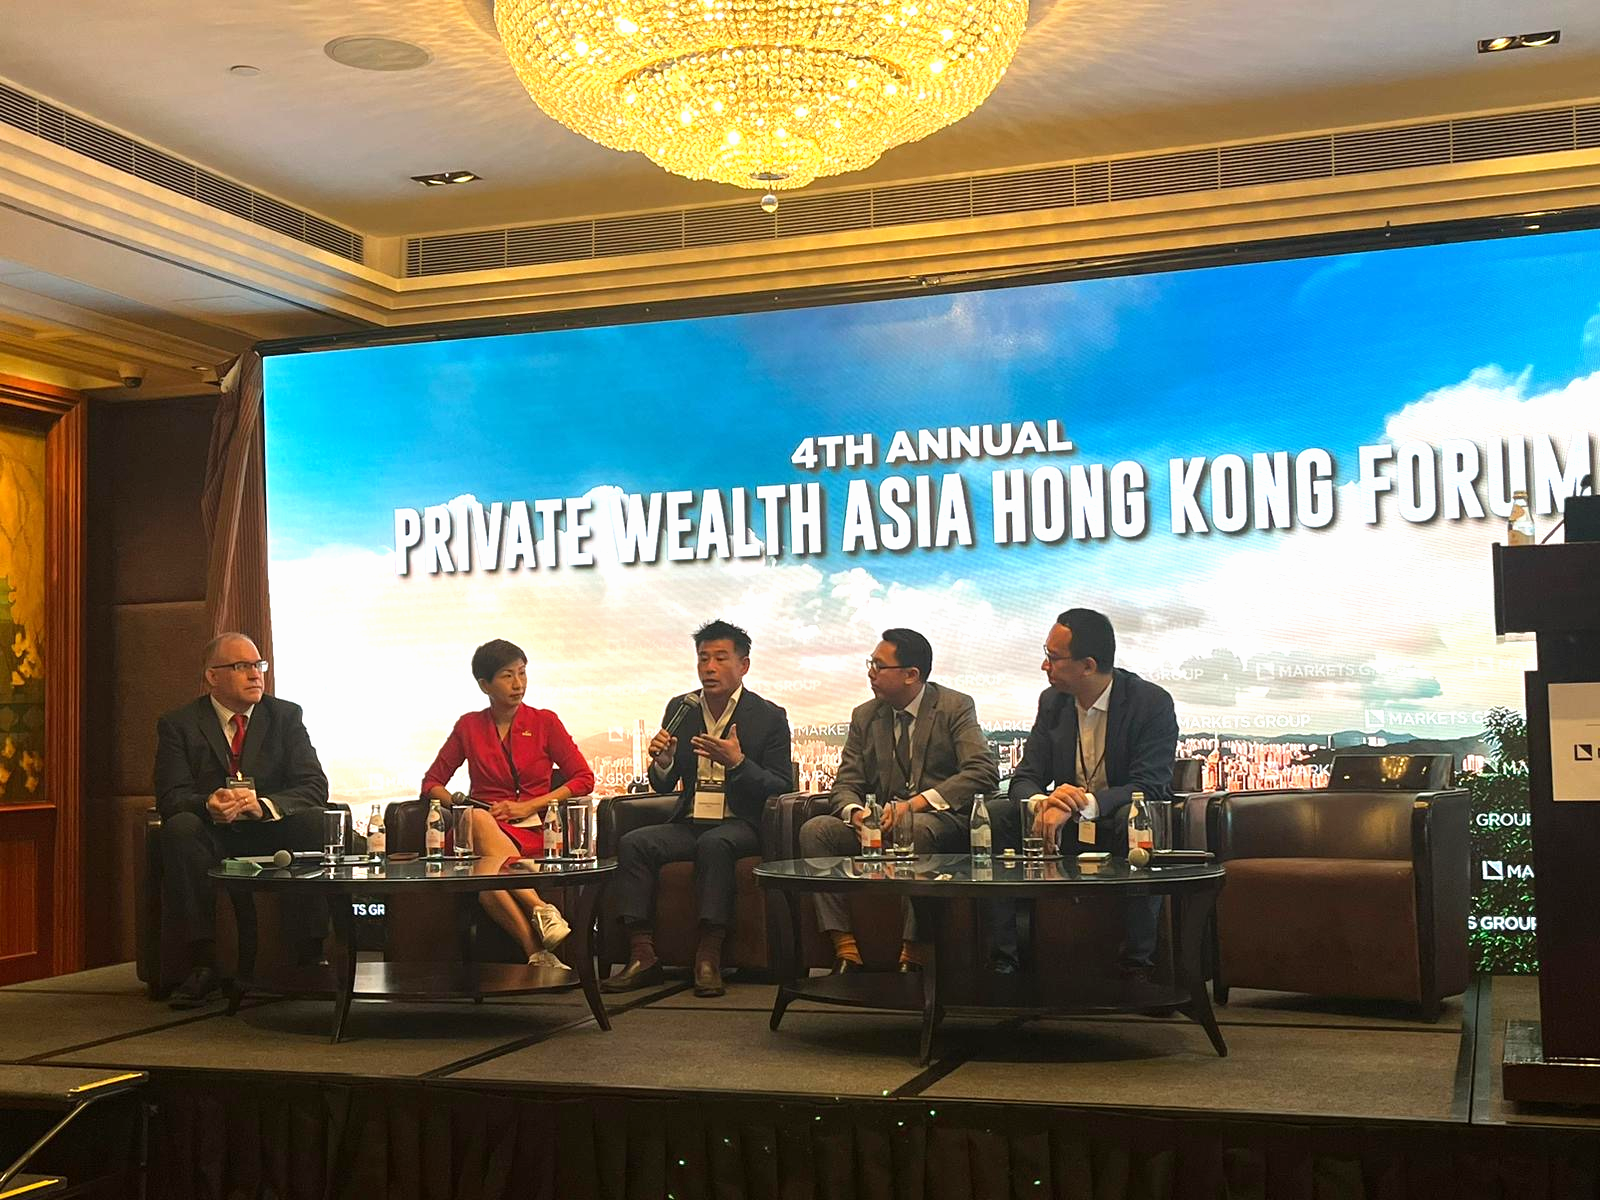 RICHARD GRASBY PROMOTES THE BVI AS A TOP-TIER JURISDICTION FOR PRIVATE WEALTH MANAGEMENT AT HONG KONG FORUM